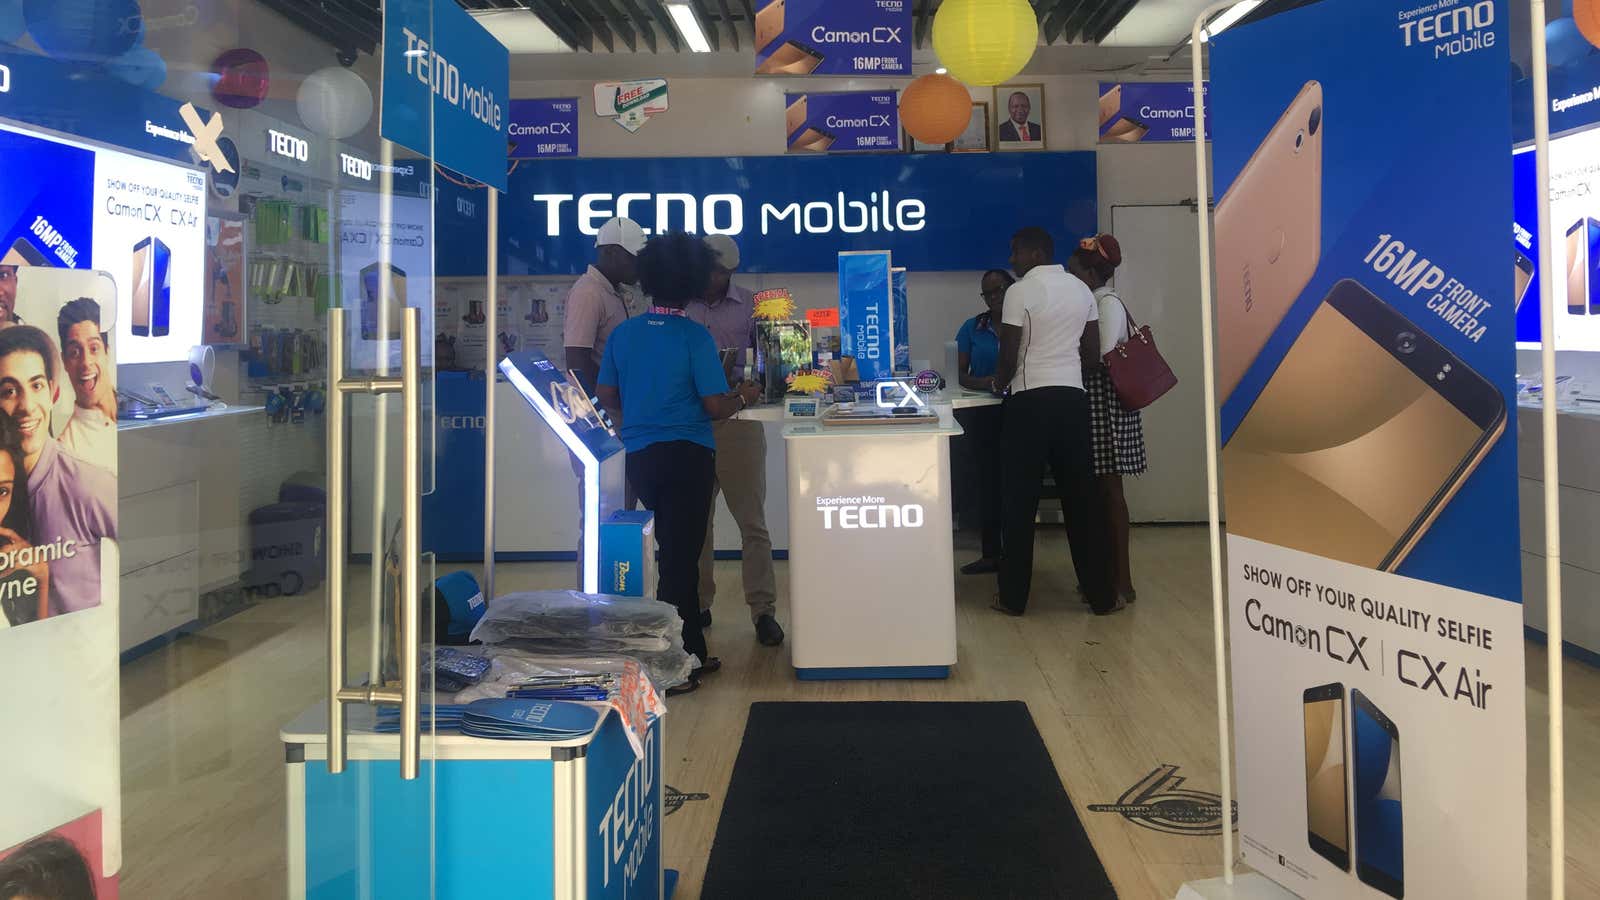 Tecno is Transsion Holdings’ flagship mobile phone brand.